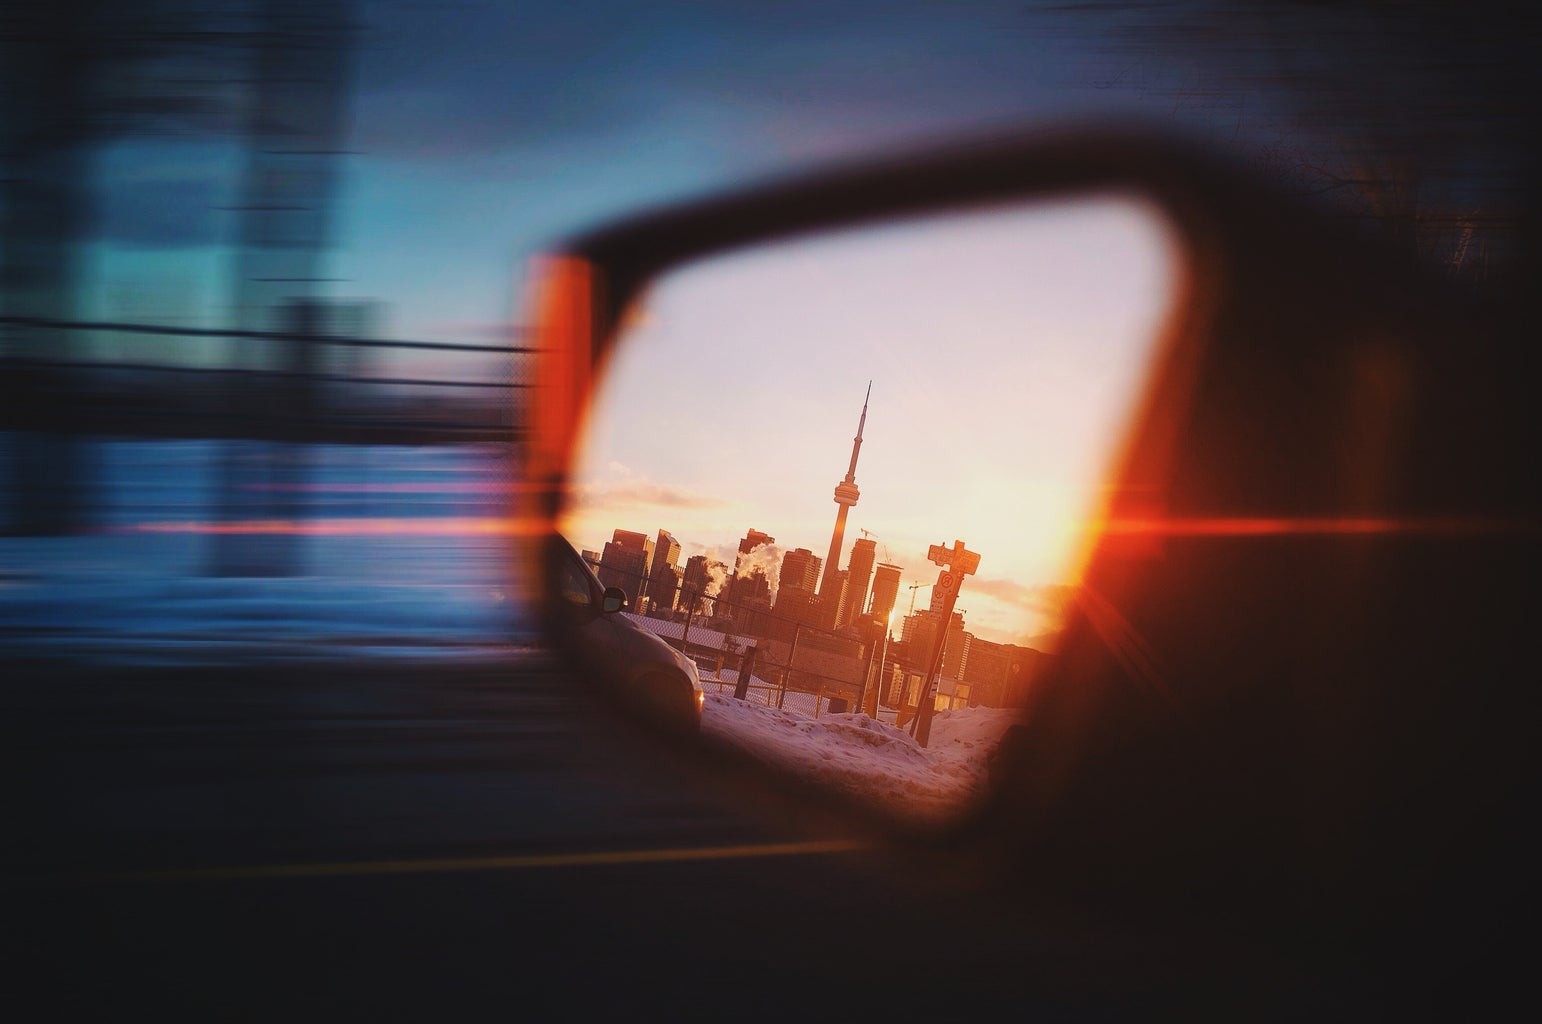 city view in sideview mirror